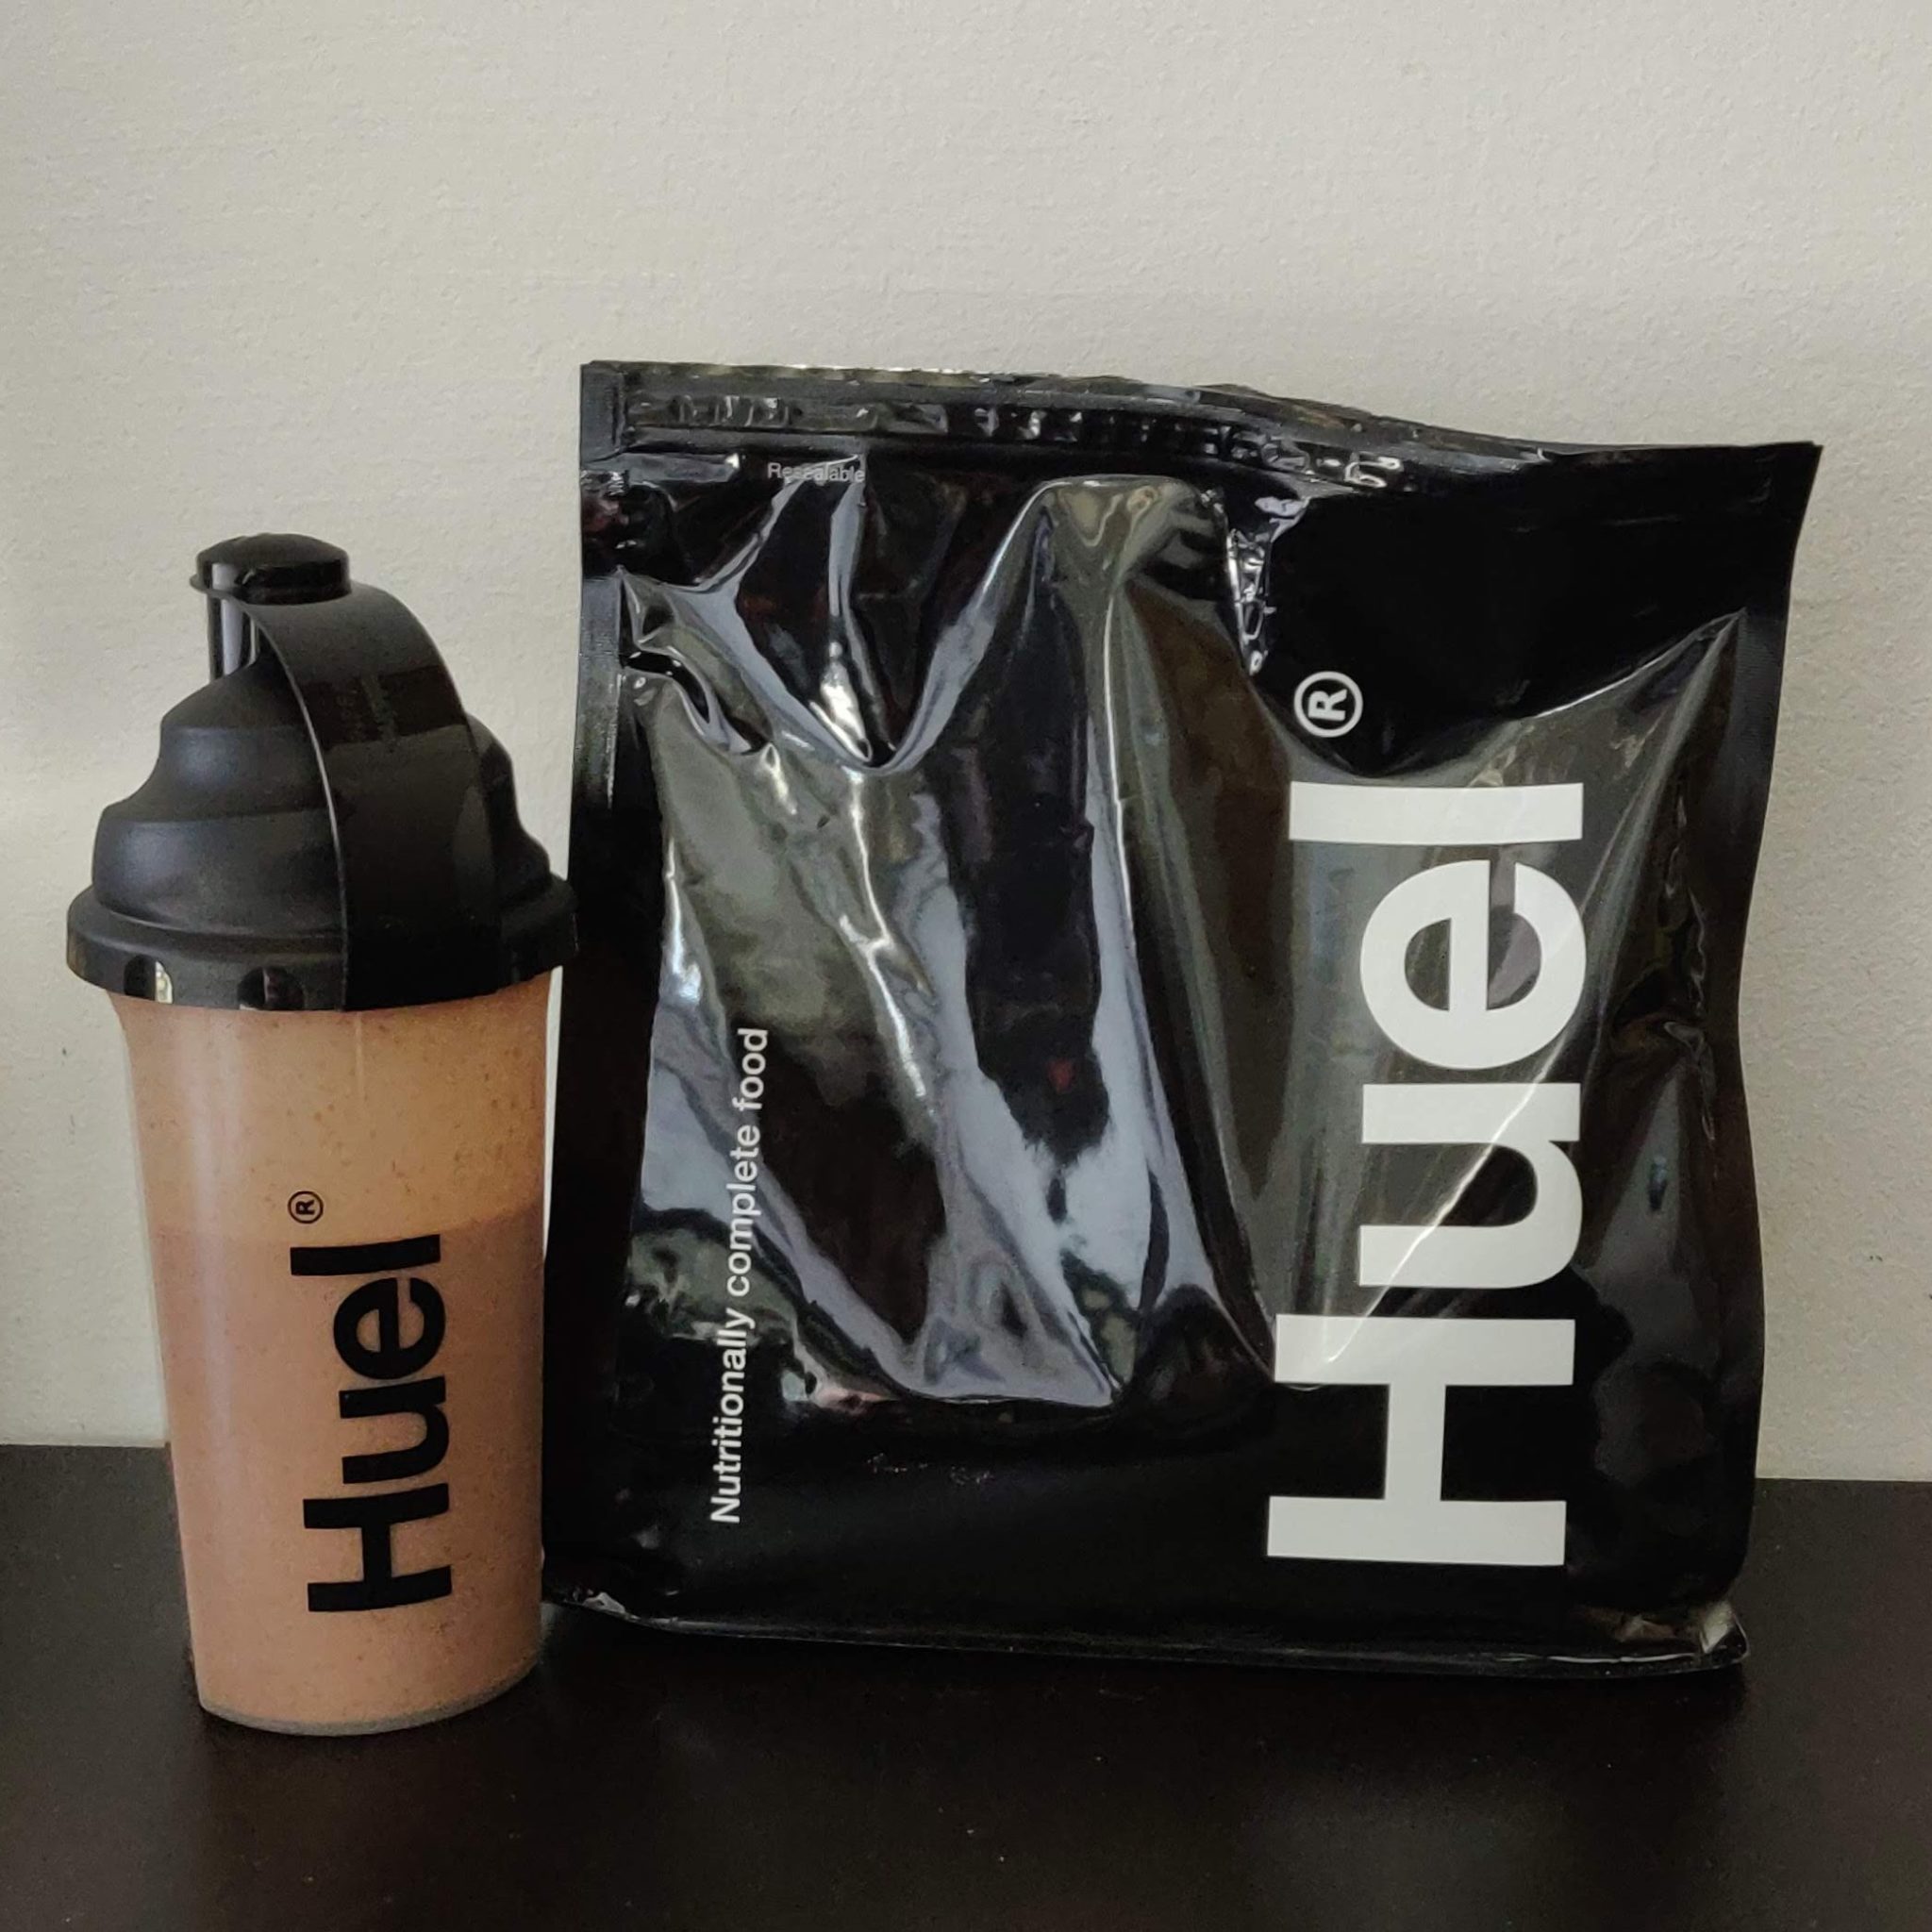 Is Black The Best Huel Has To Offer? Review